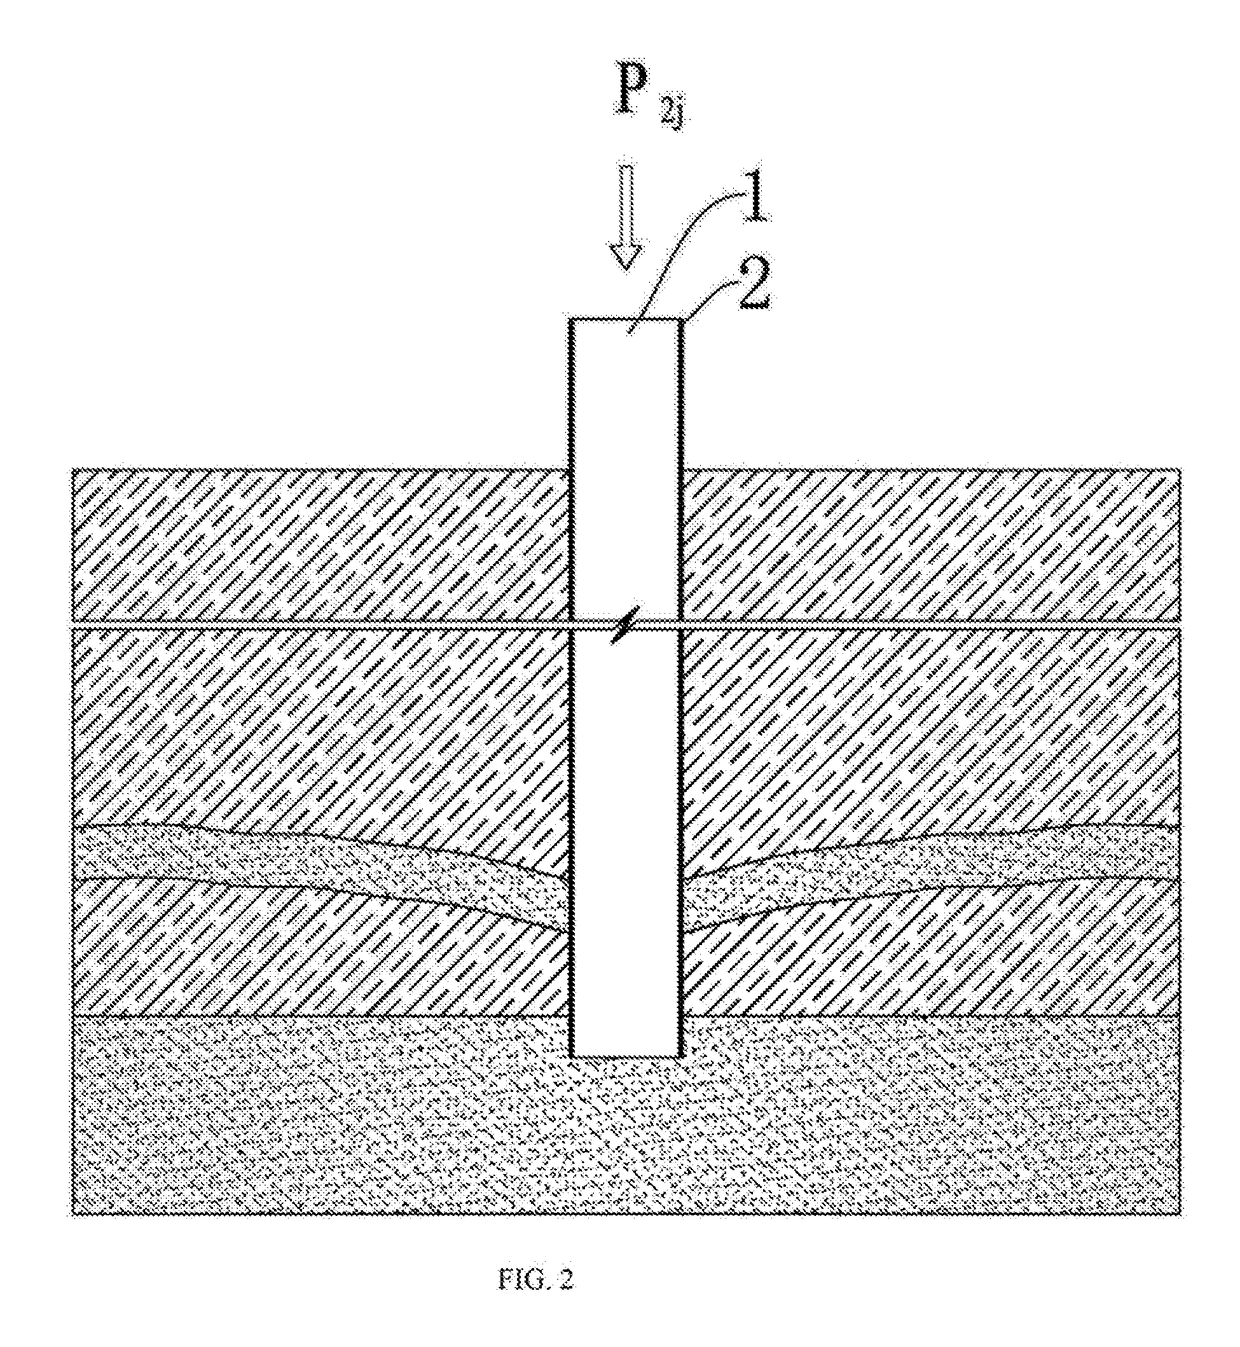 Test method for friction resistance at inner and outer sidewalls of pipe pile